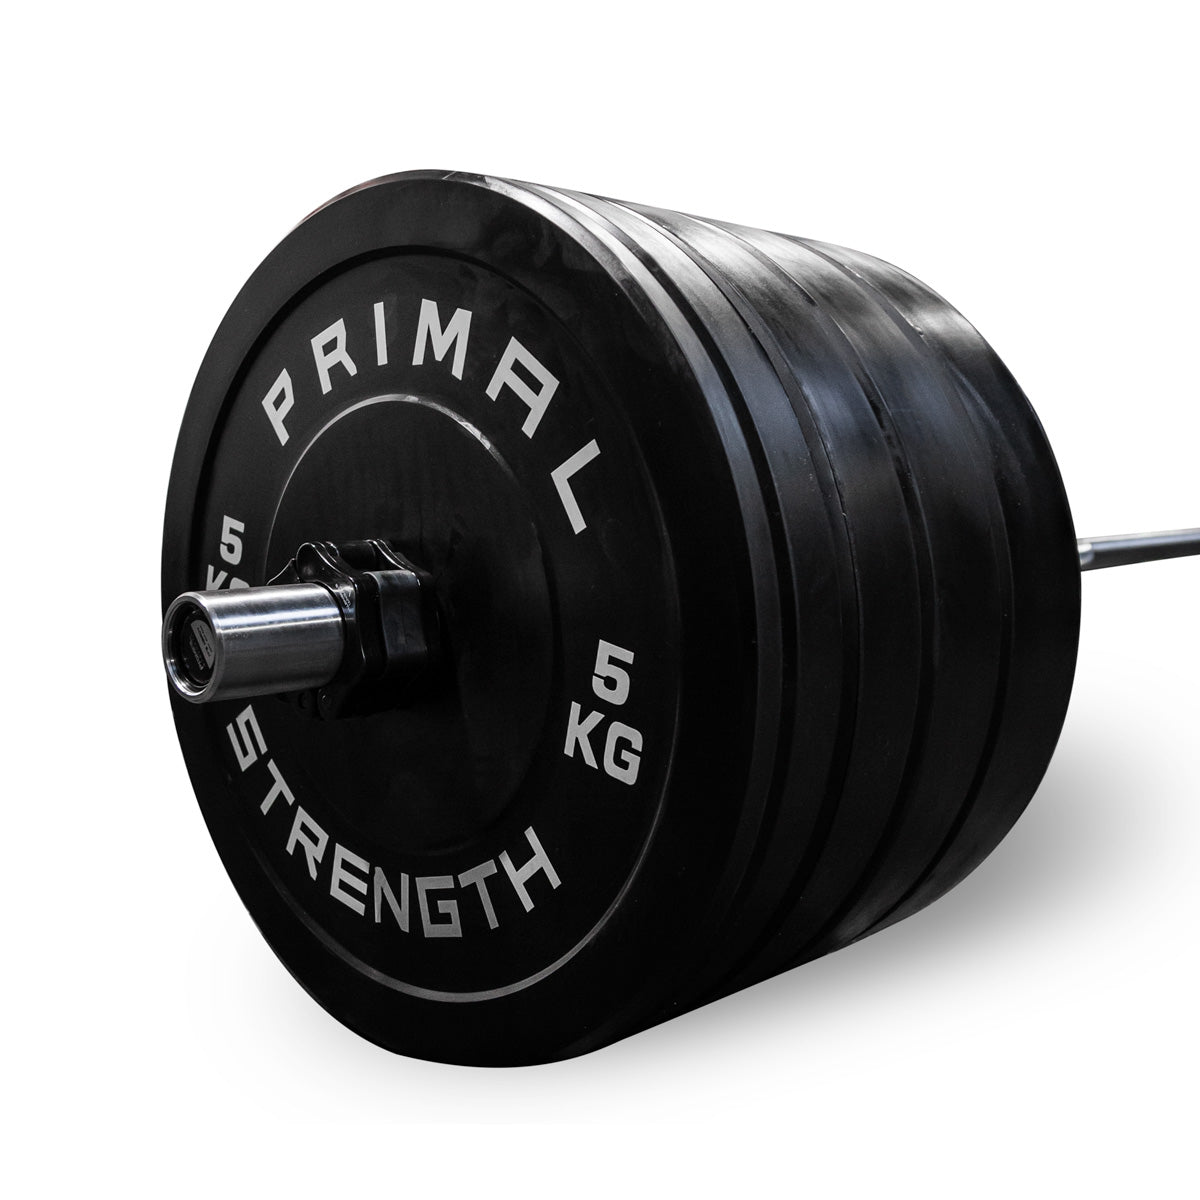 black bumper weight plates loaded onto a olympic barbell